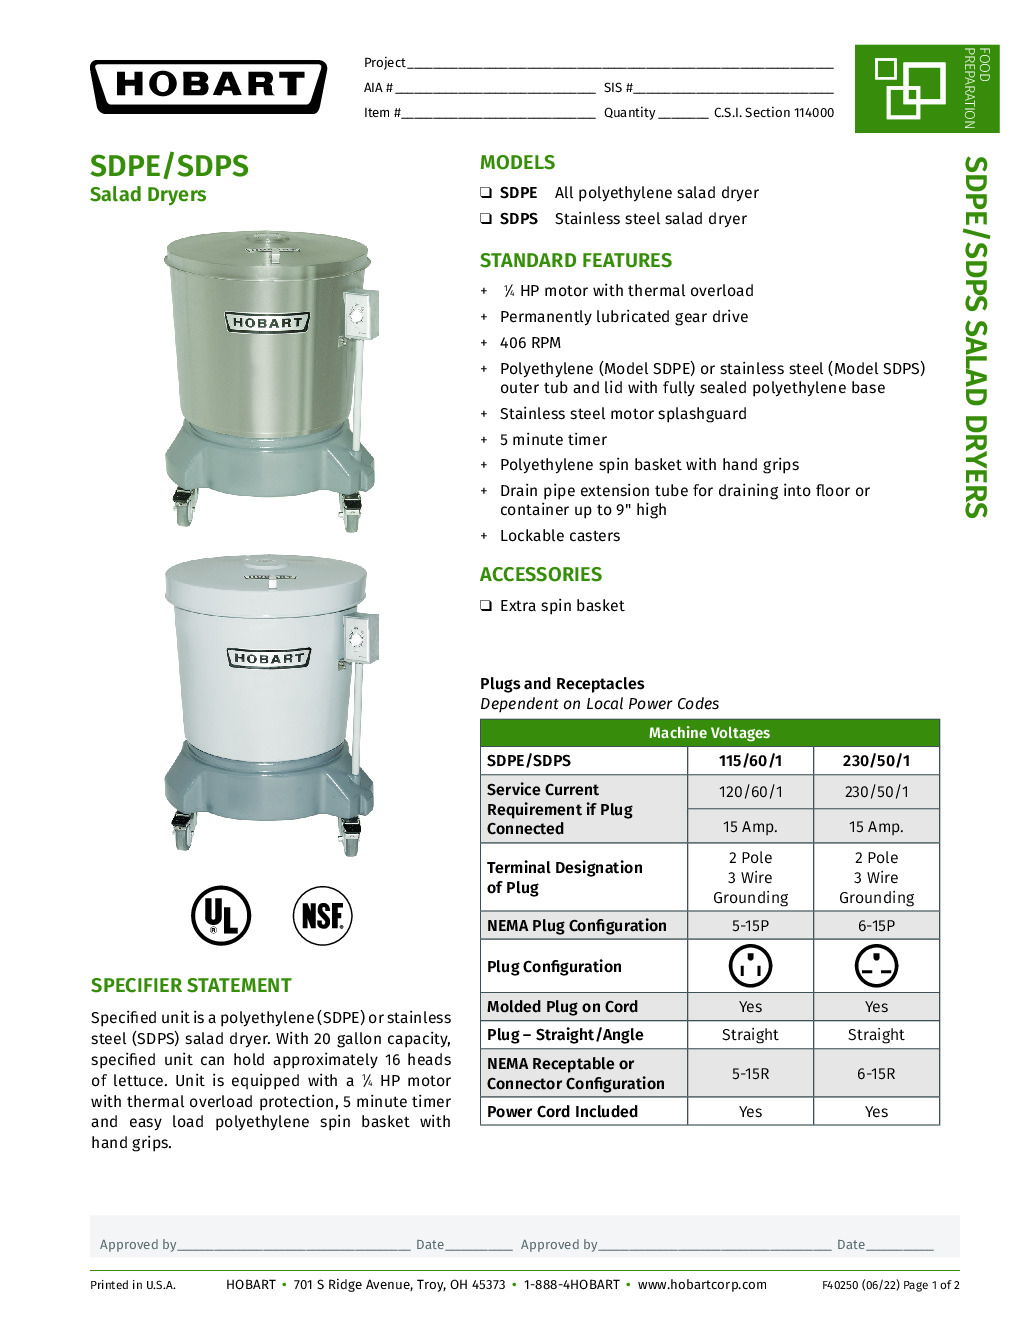 Hobart SDPS-11 Floor Model 20-Gallon Salad / Vegetable Dryer with Stainless Steel Outer Tub & Lid, 1/4 hp, 115v/60/1-ph